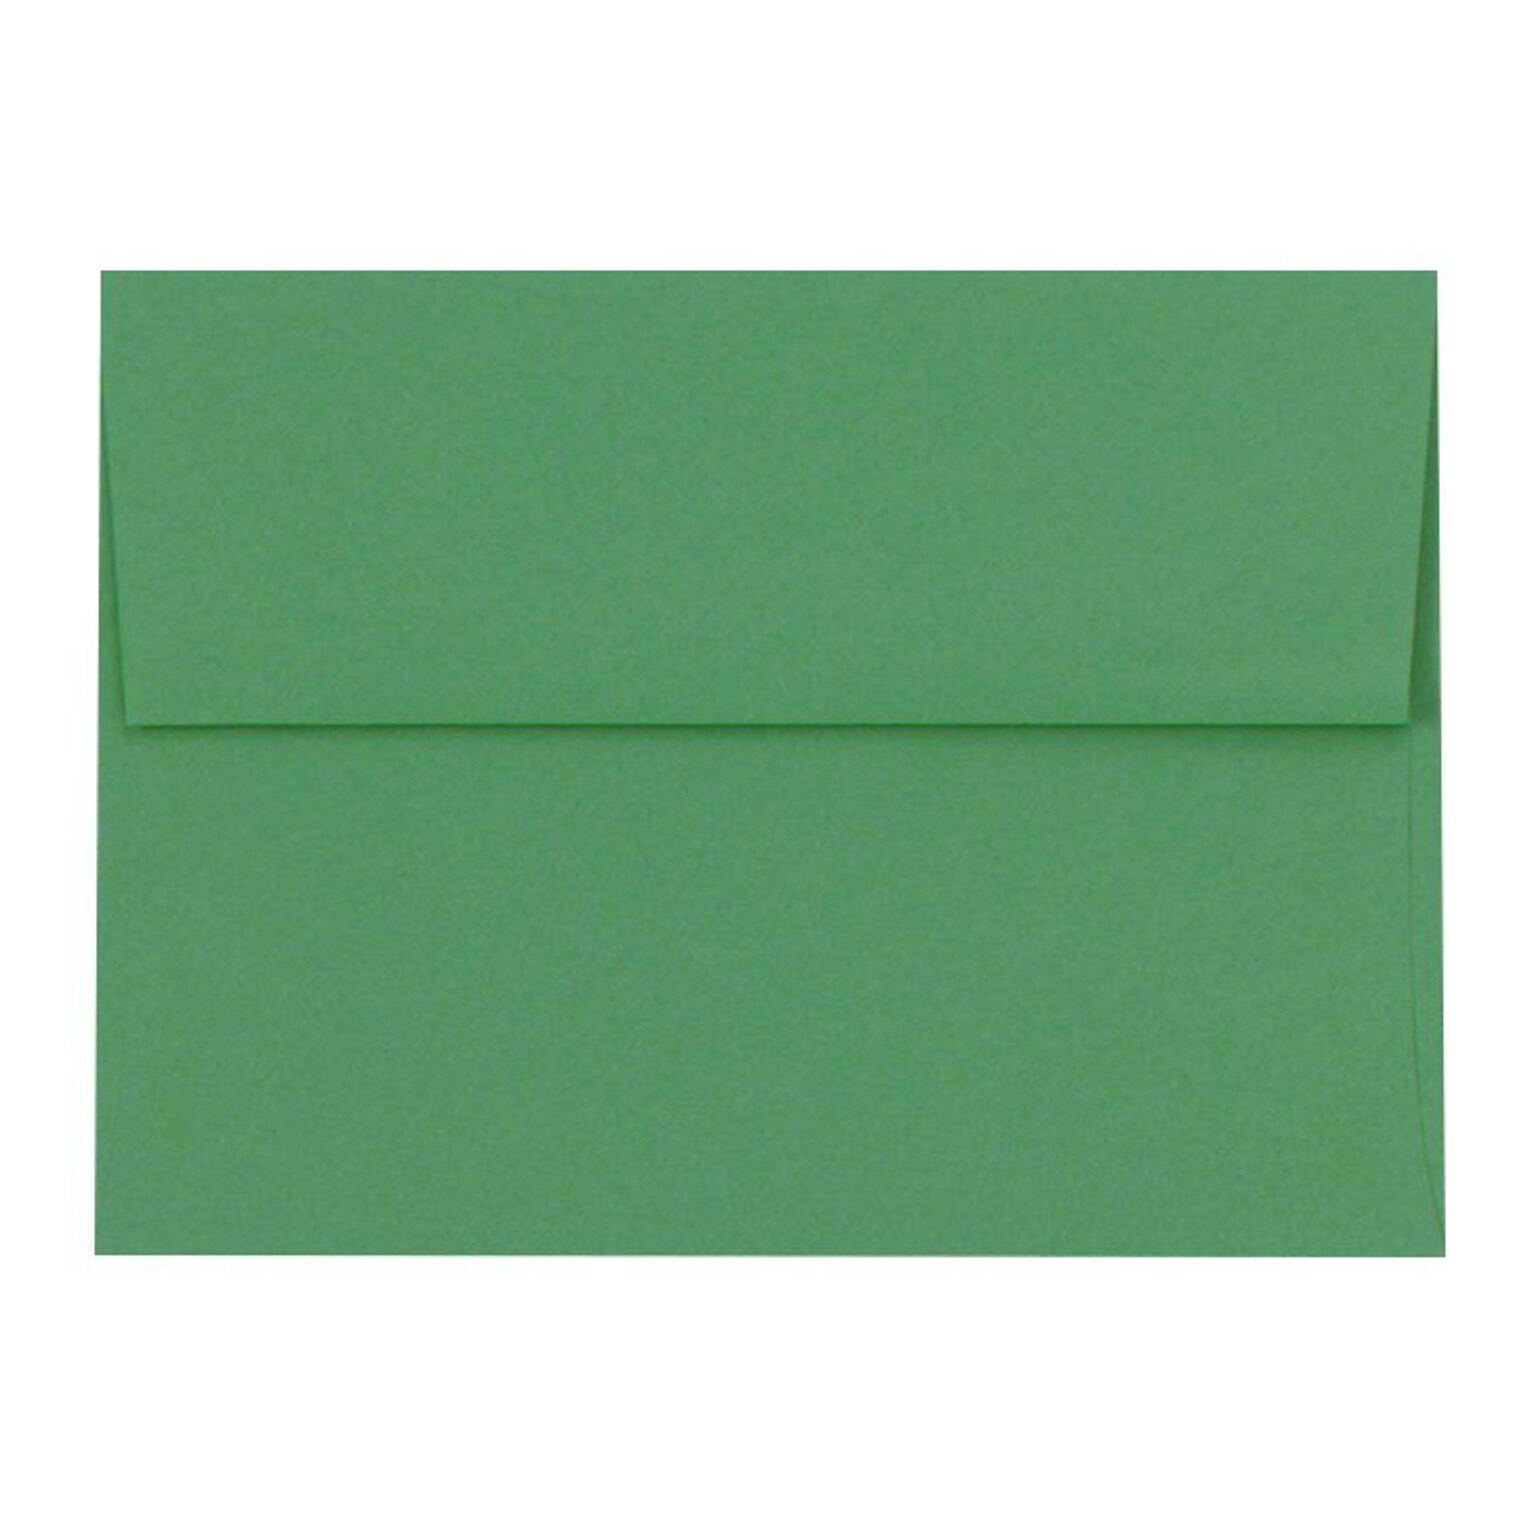 LUX 5 3/4 x 8 3/4 80lbs. A9 Invitation Envelopes W/Glue, Holiday Green, 50/Pack